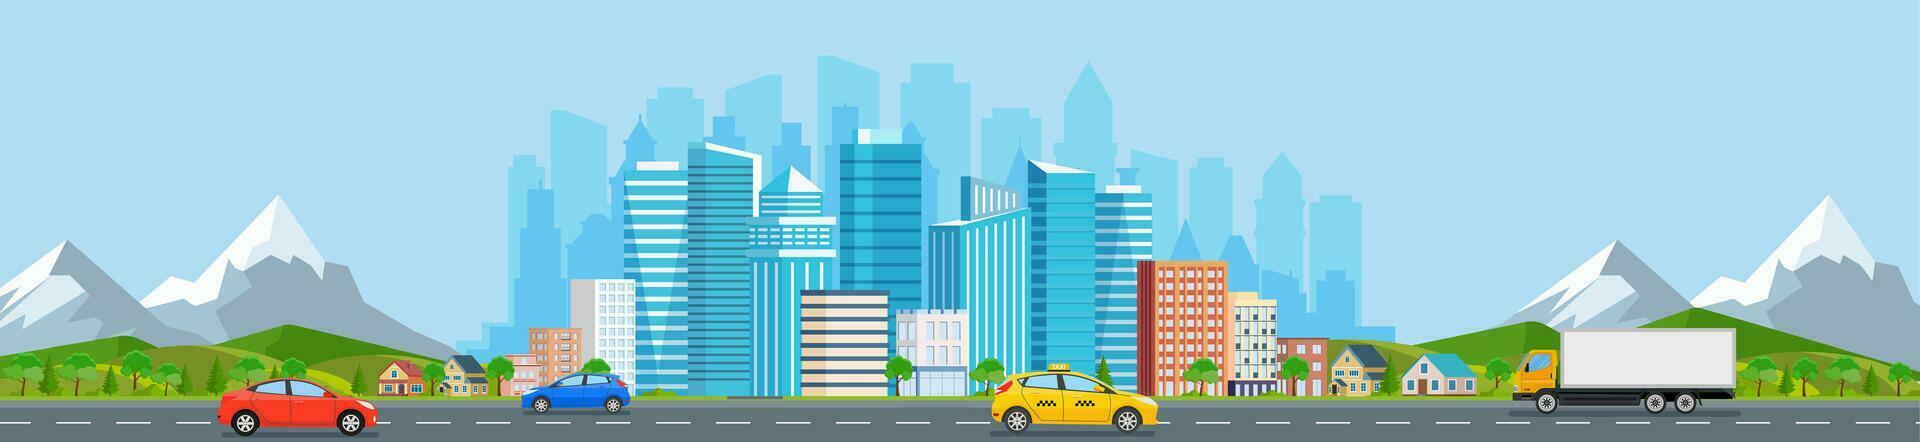 Landscape with buildings, mountains and hills. city concept and suburban life. City street, large modern buildings, skyscrapers and suburb with private houses and car Vector illustration in flat style